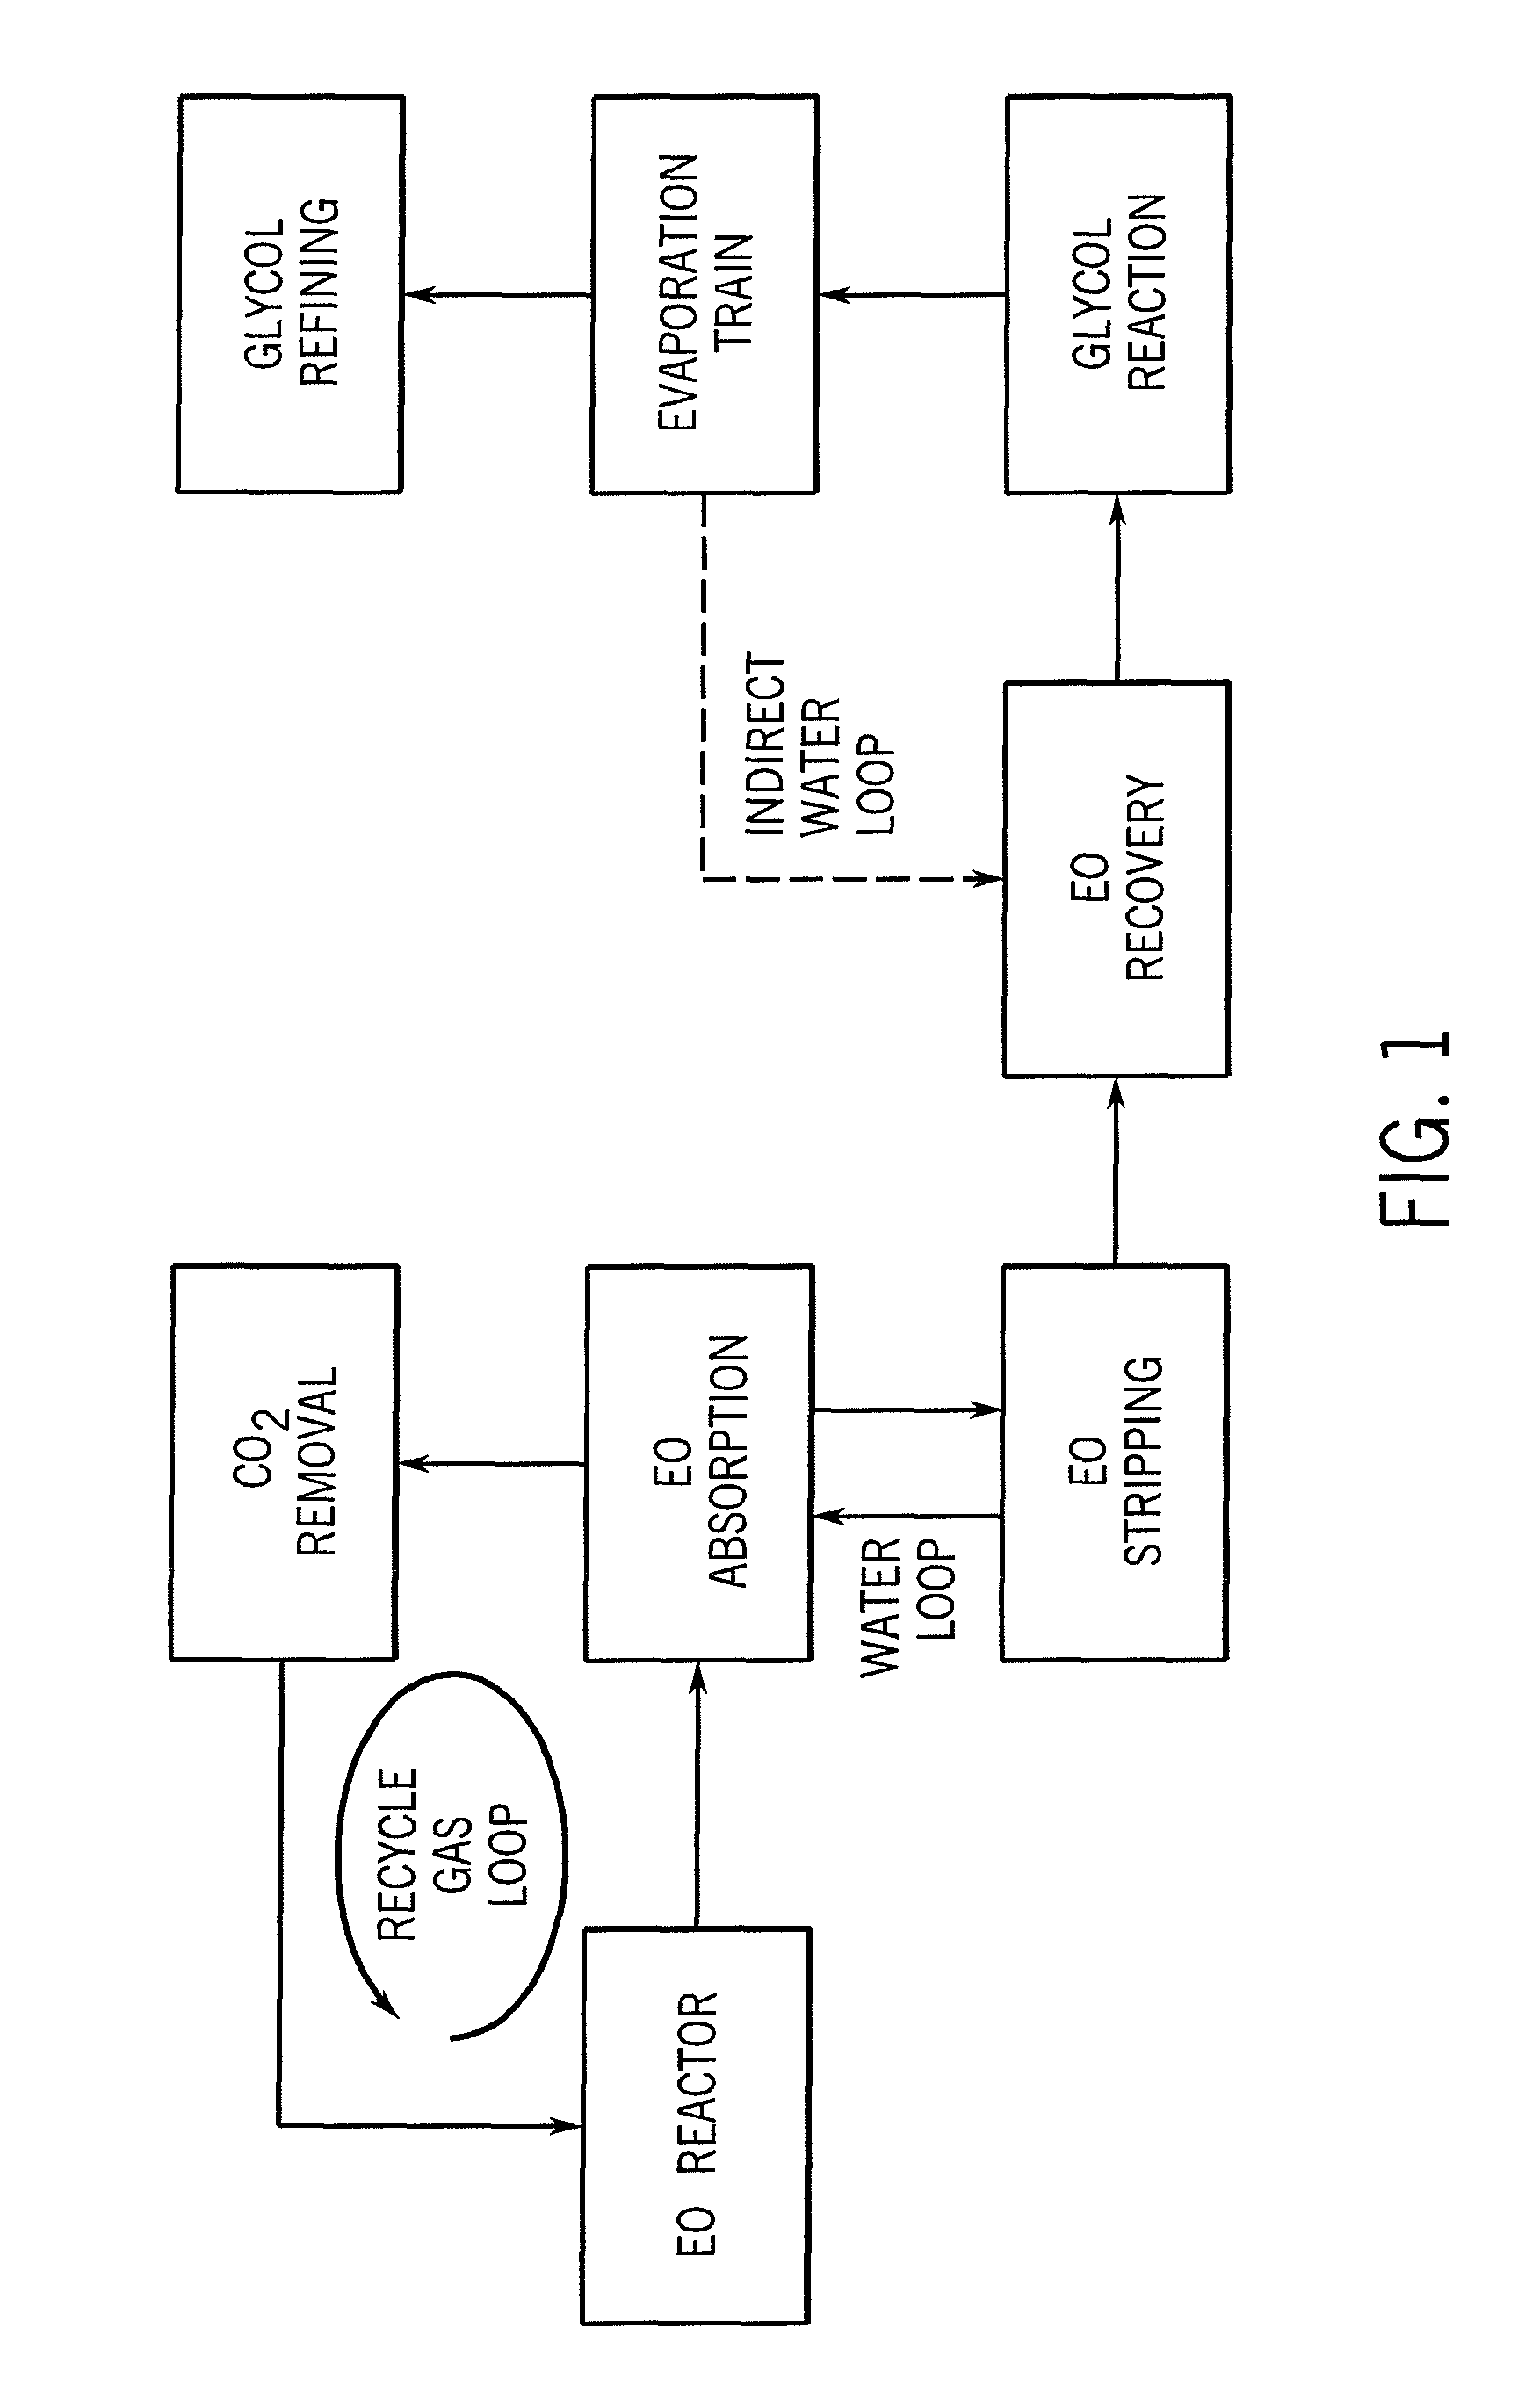 Two-stage, gas phase process for the manufacture of alkylene glycol